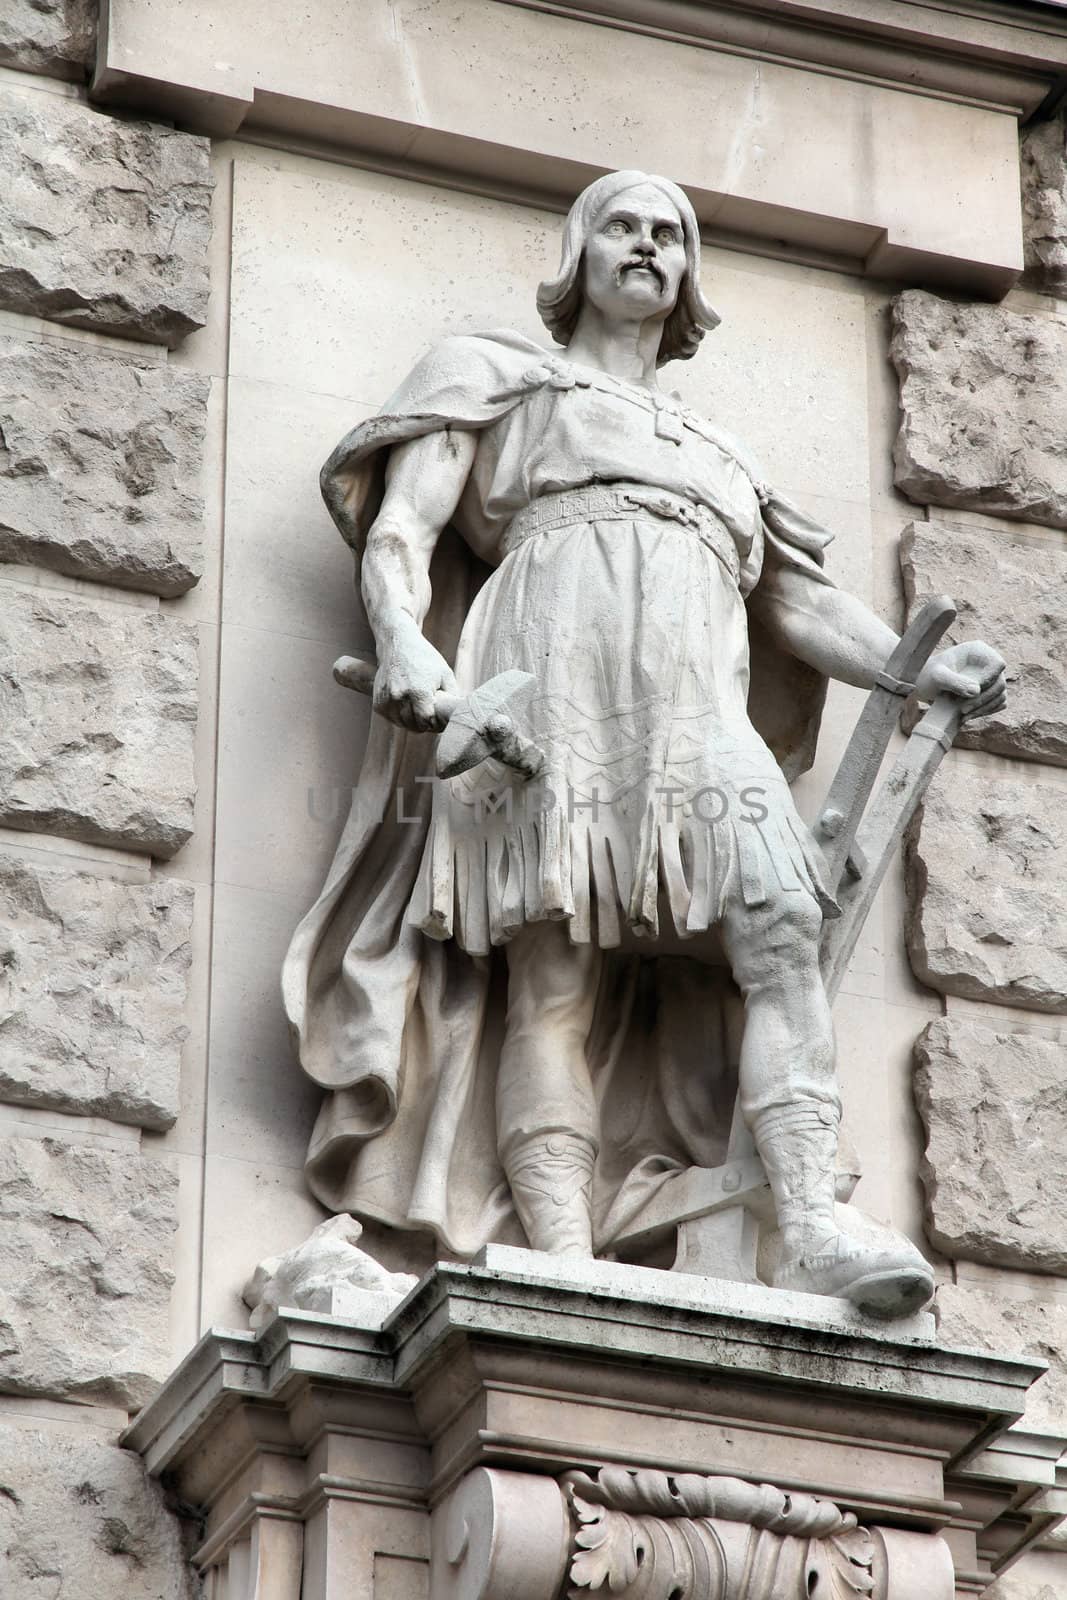 Vienna, Austria - statue in Neue Burg (part of Hofburg palace) facade. Sculpture depicts Slavic people. The Old Town is a UNESCO World Heritage Site.